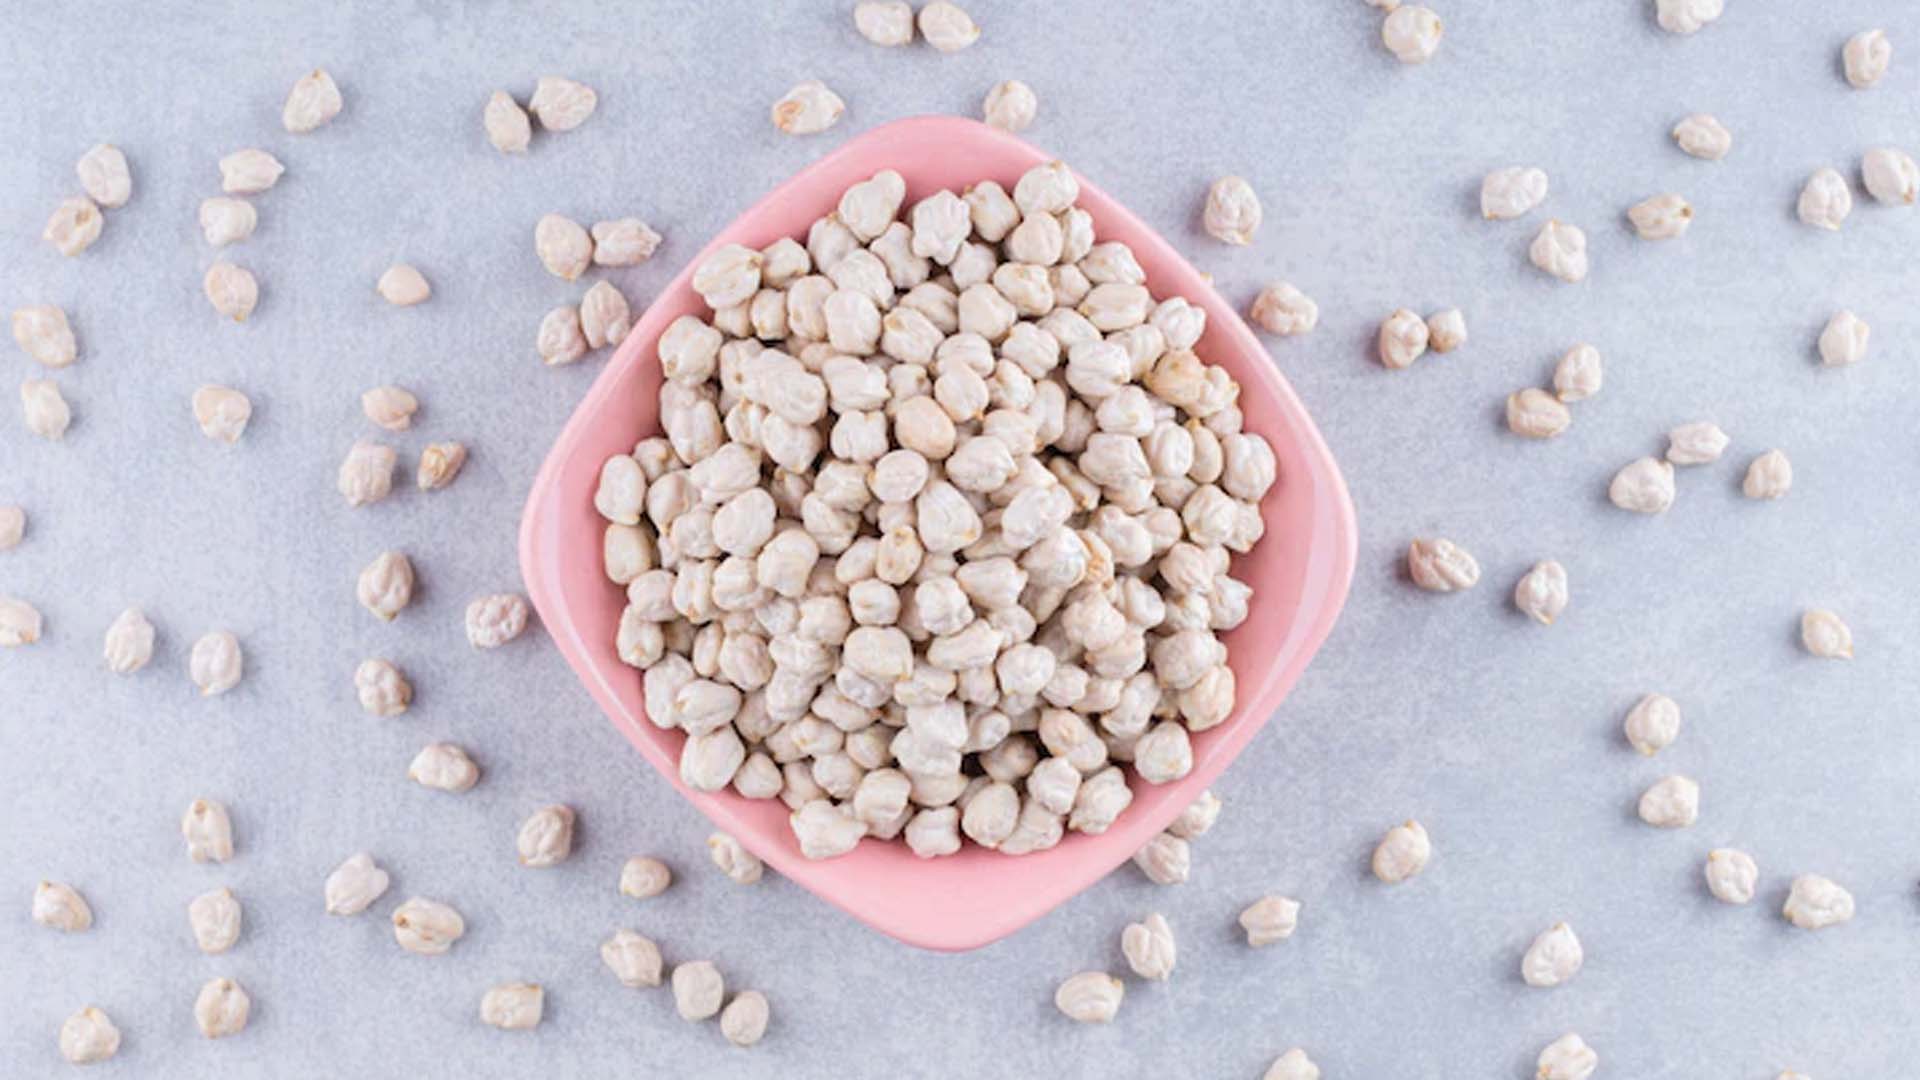 Chickpeas Nutrition and Health Benefits